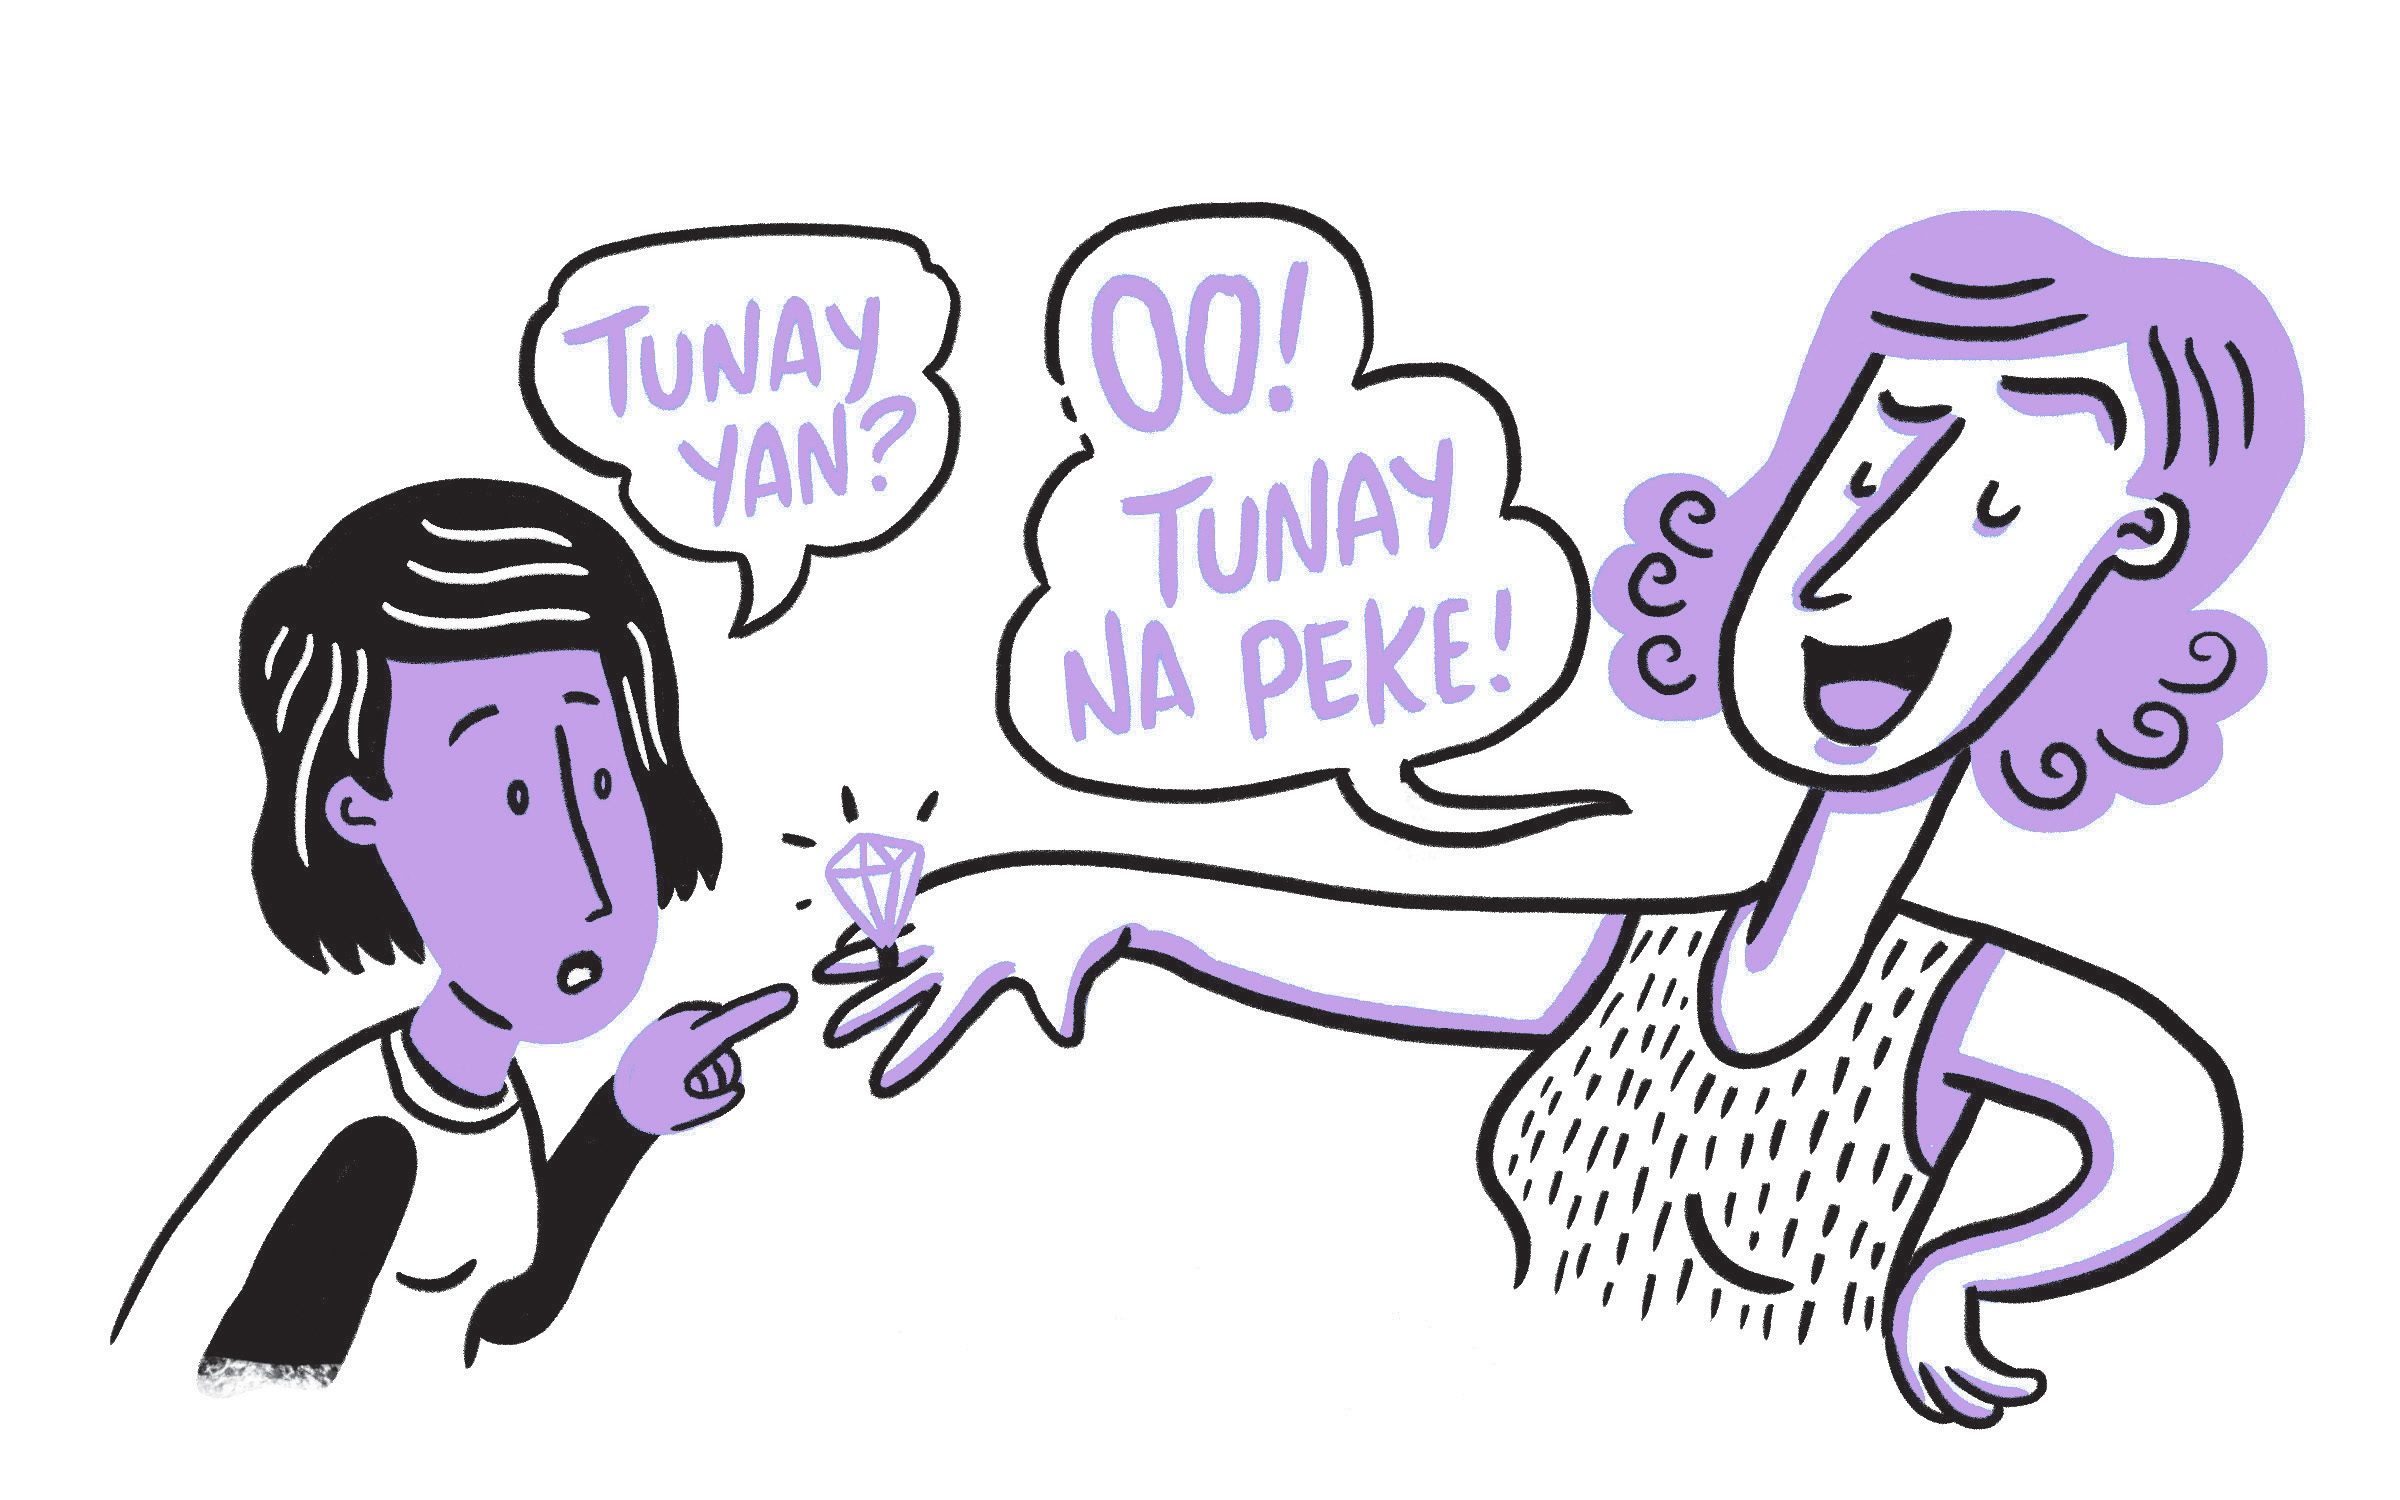 TUNAY 'YAN? How to face this question and come away intact? Illustrations by Pushpin Visual Solutions 